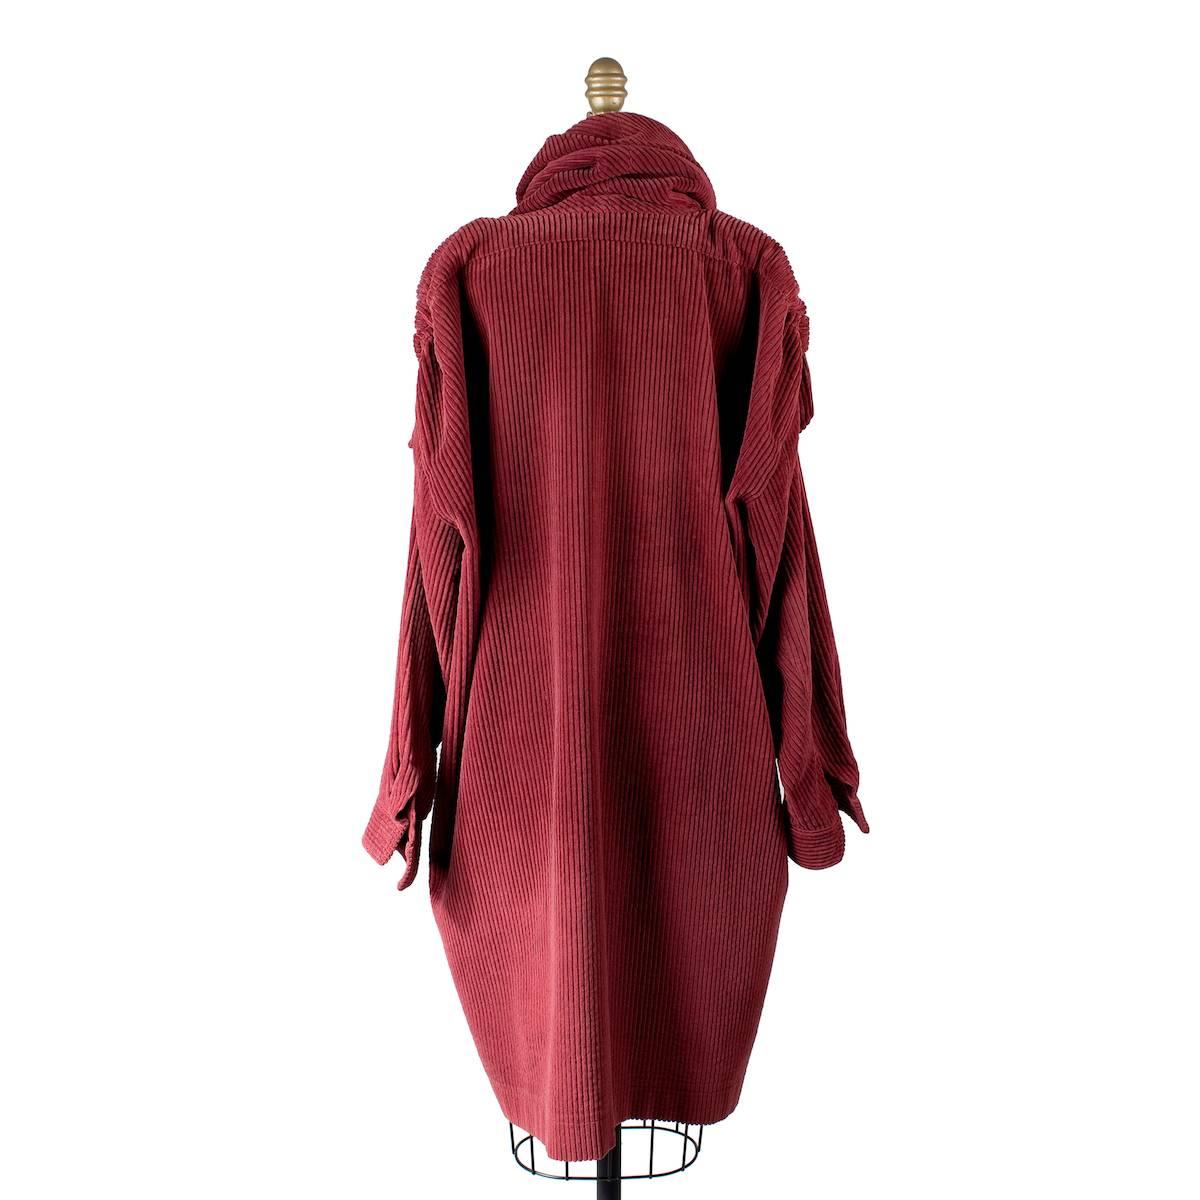 Vntage cord cloak from Kenzo.  Feaures button tab on shoulders and shawl collar.  Thick maroon colored corduroy.  